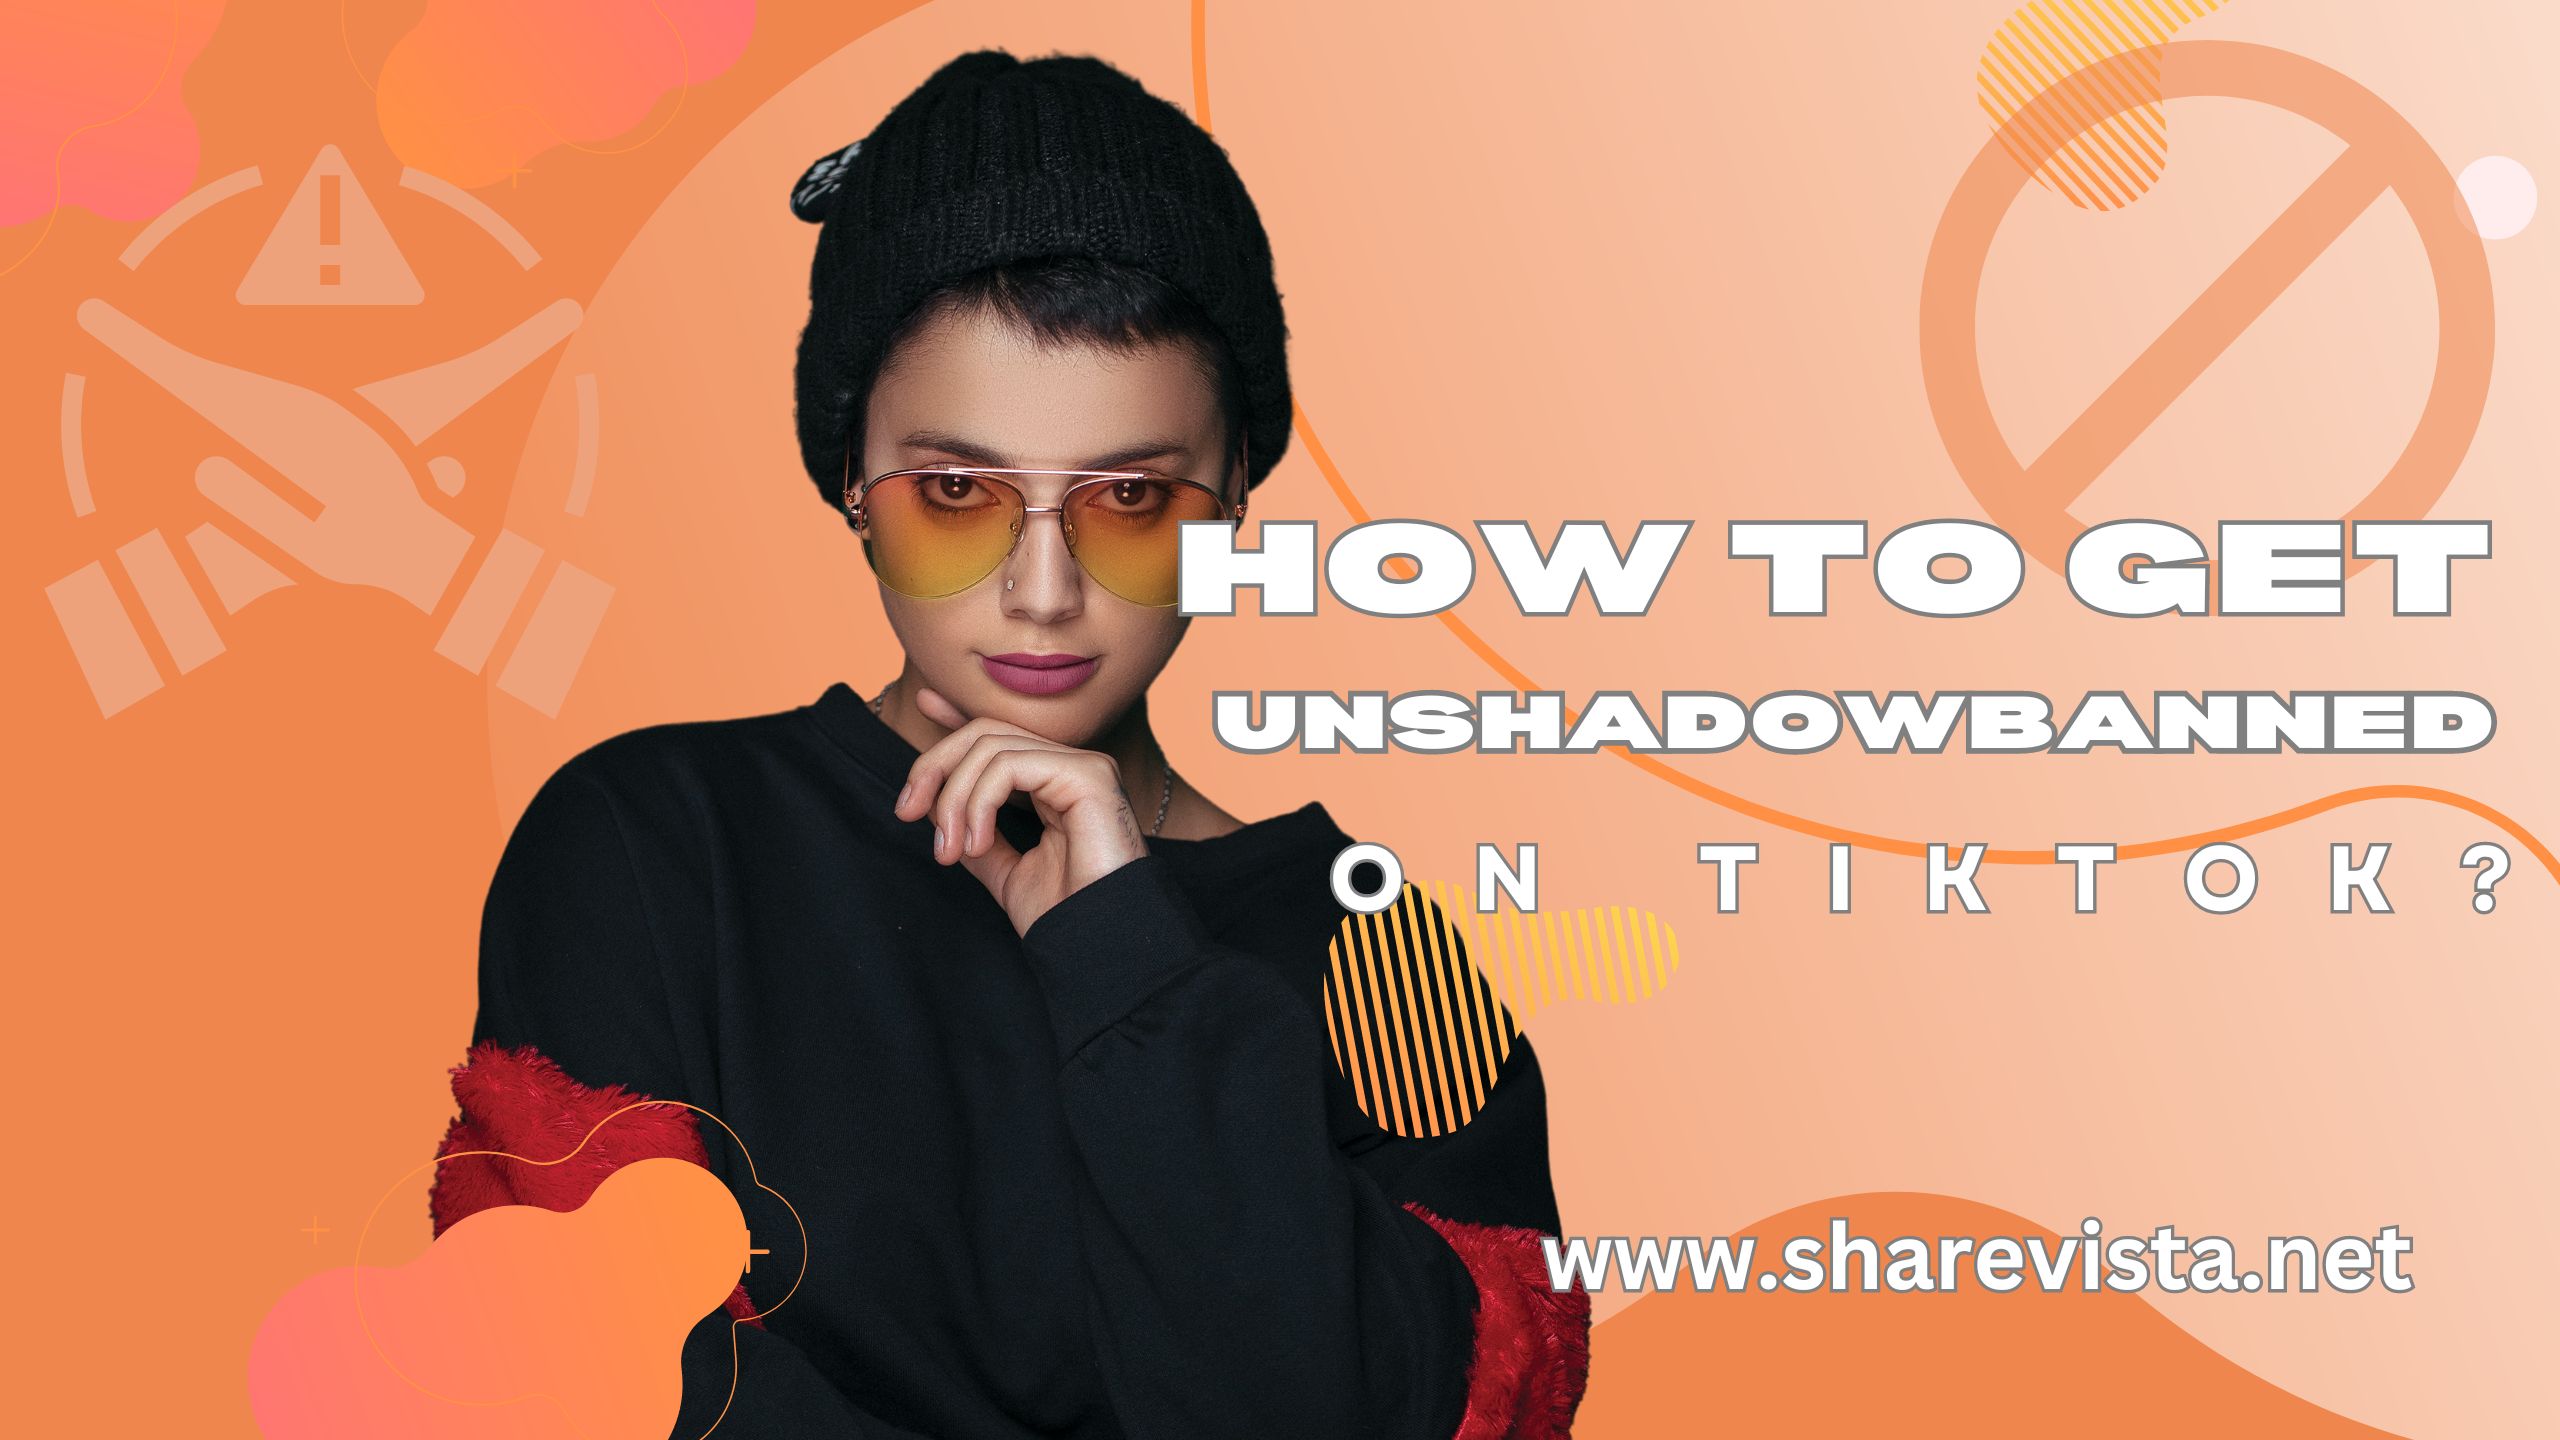 How to get un shadowbanned on TikTok